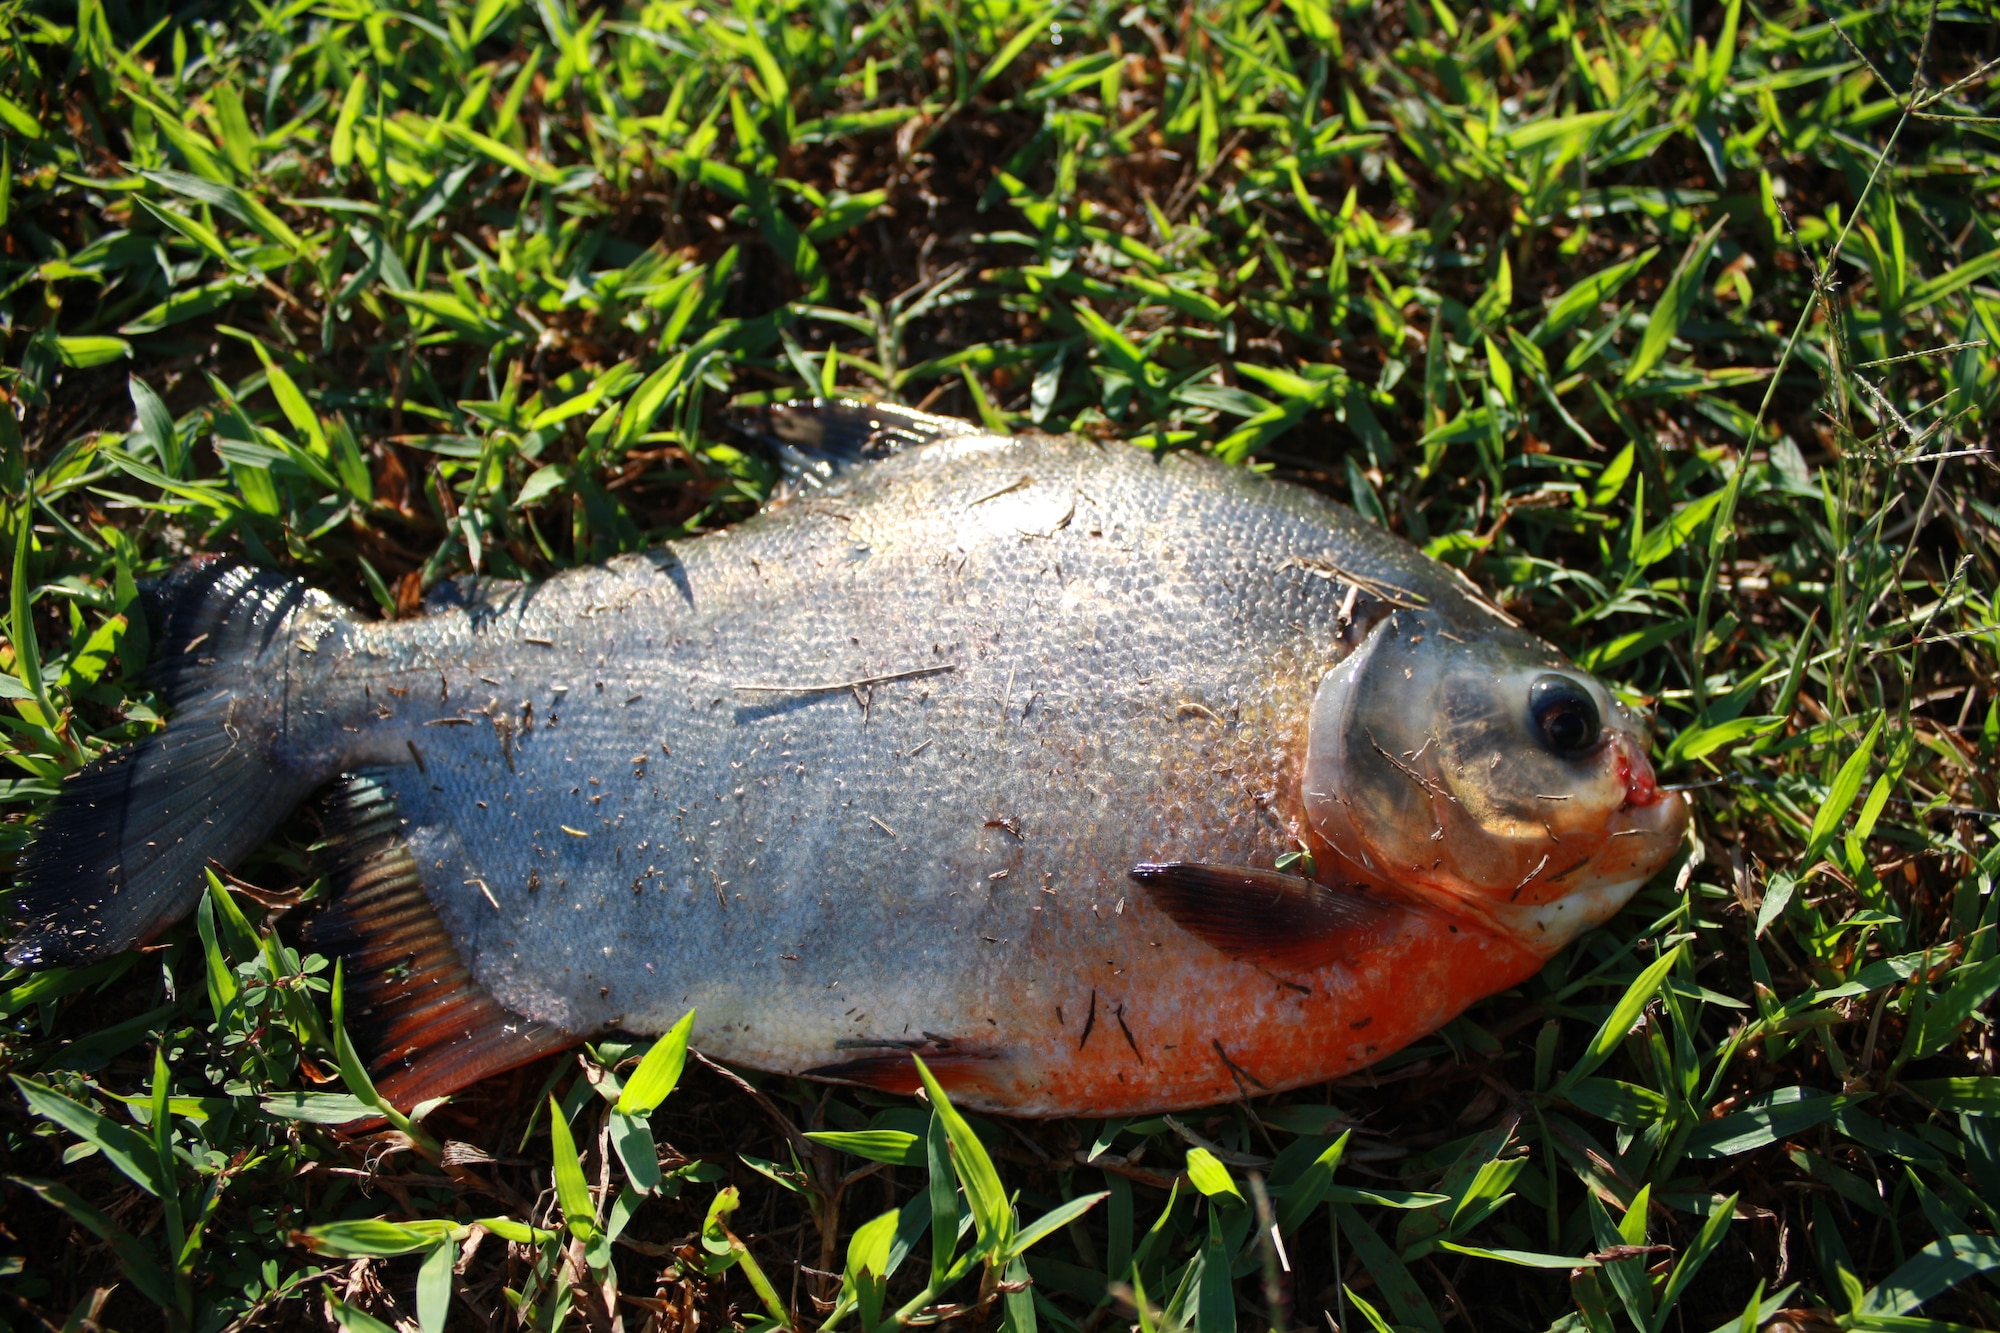 A Pacu caught from the base lake by Donny Cook Sept. 15. Pacu are a fresh water fish from South America related to the Piranha. (Courtesy photo)